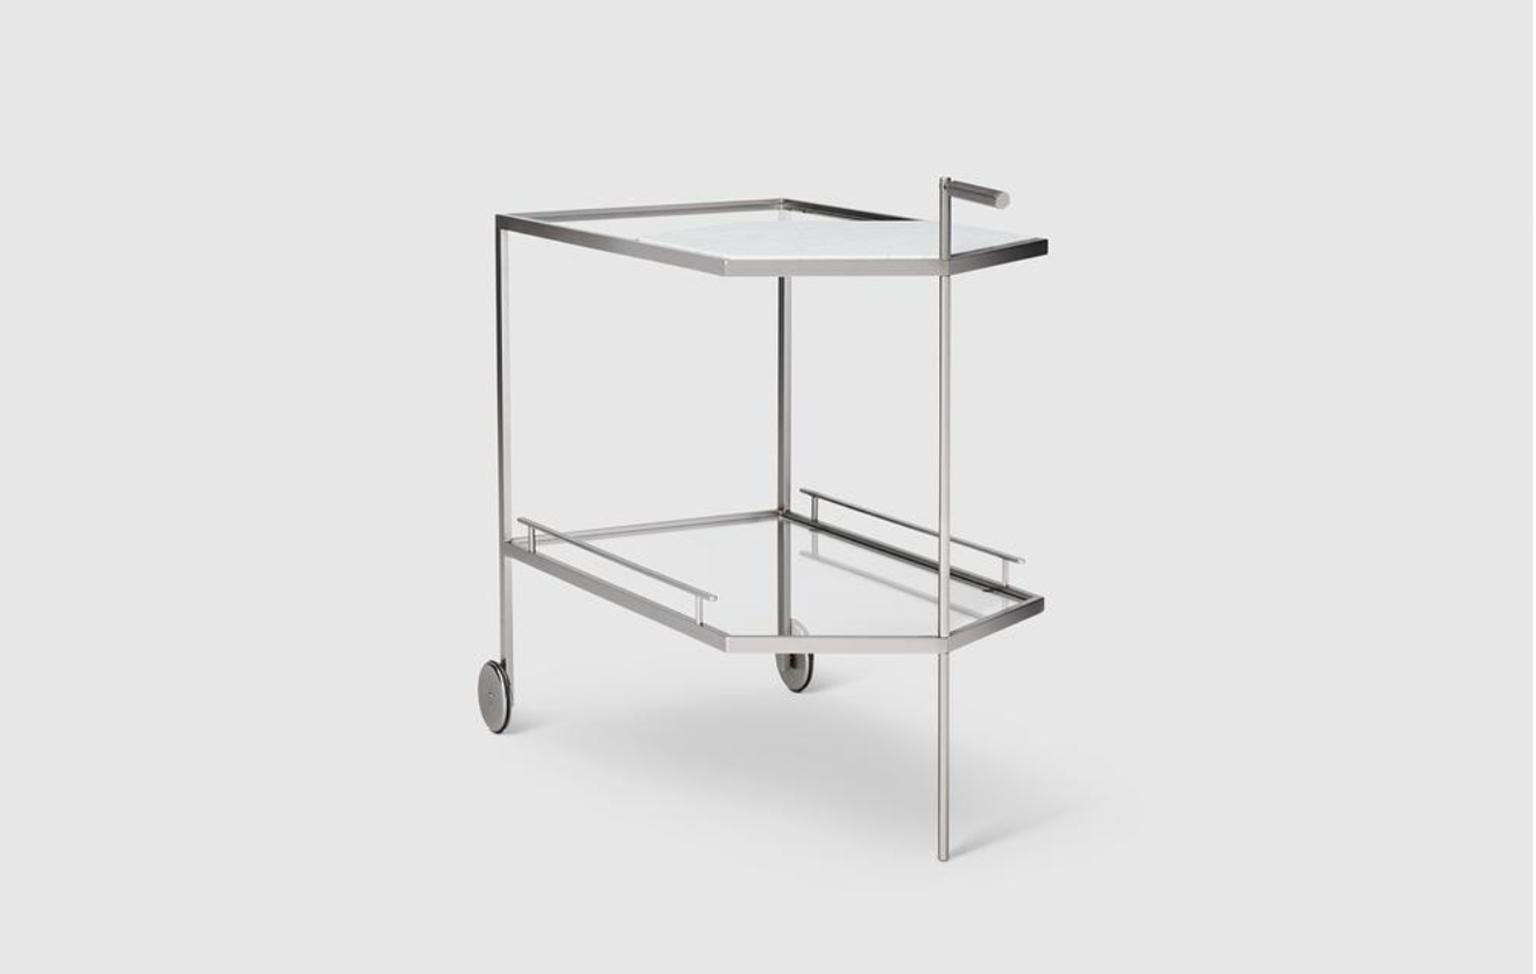 The Gin Lane bar cart, a Yabu Pushelberg design study in restrained luxury, leaves behind the ill-conceived and pretentious notions of luxury and want-to-be Hamptons style. Revealing a functional and minimal beauty that tips it’s hat to the original